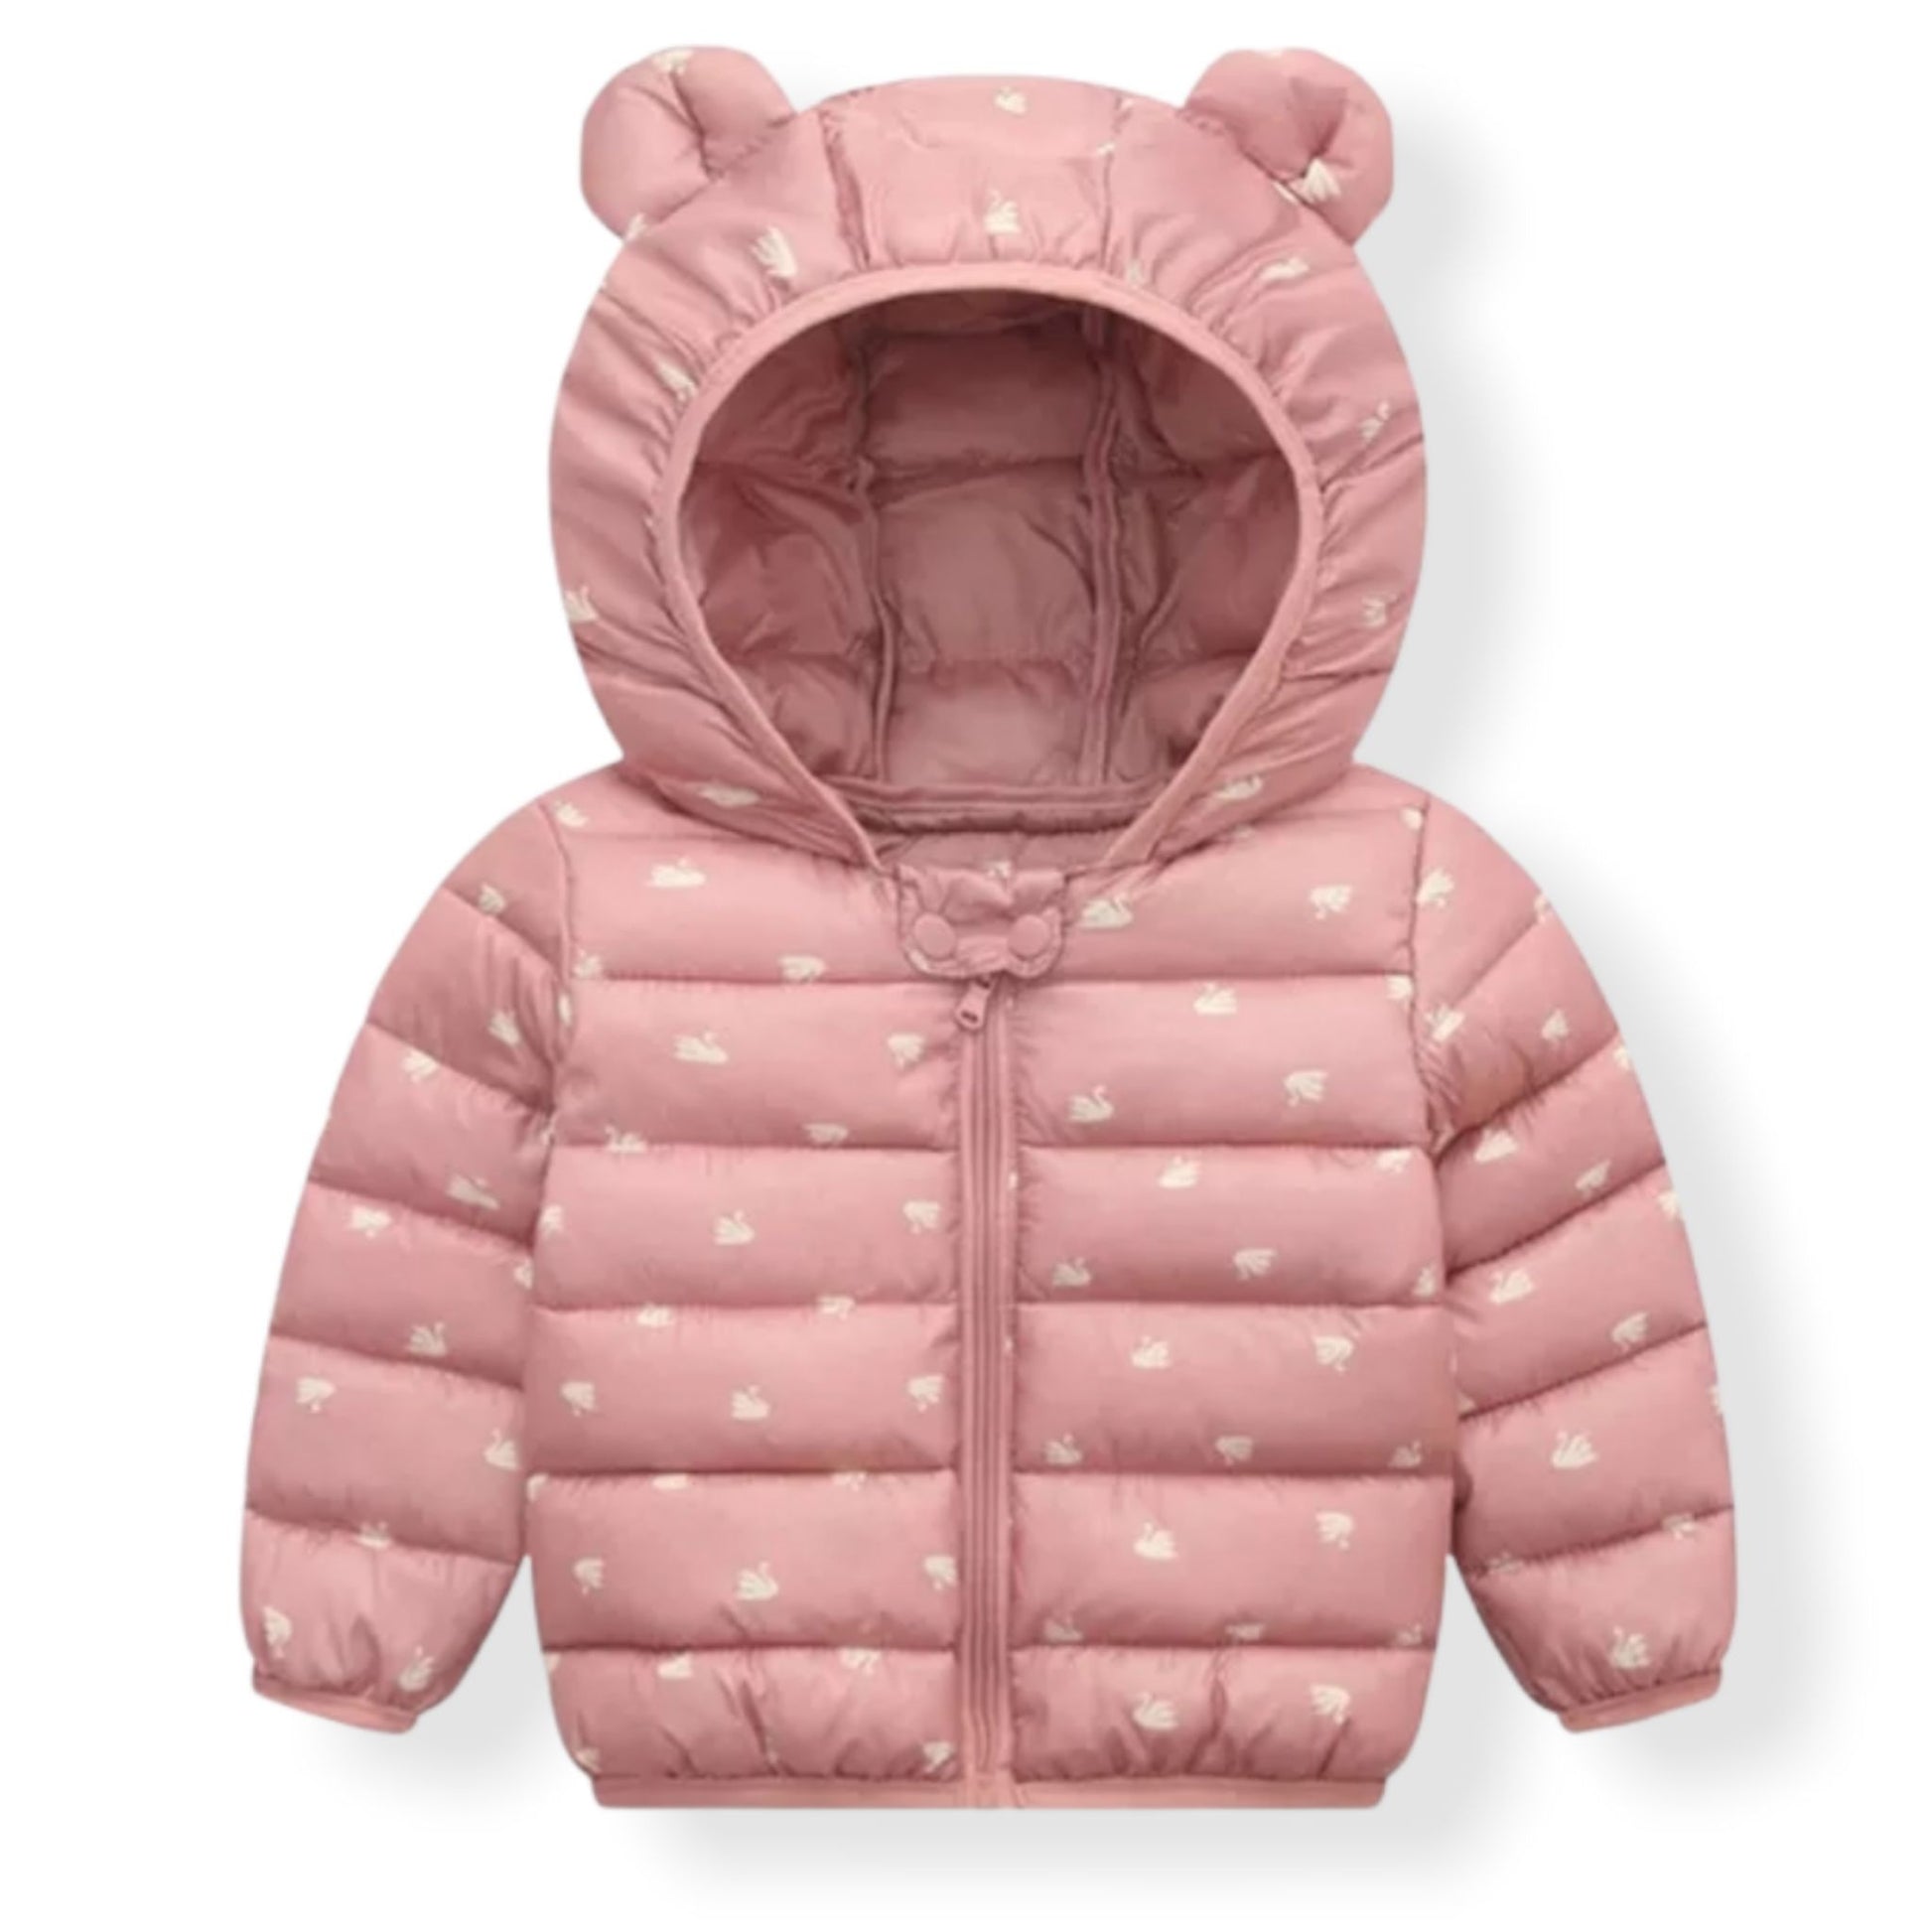 Puffer Jacket with Ears for Babies & Toddlers in Pink with White Swans